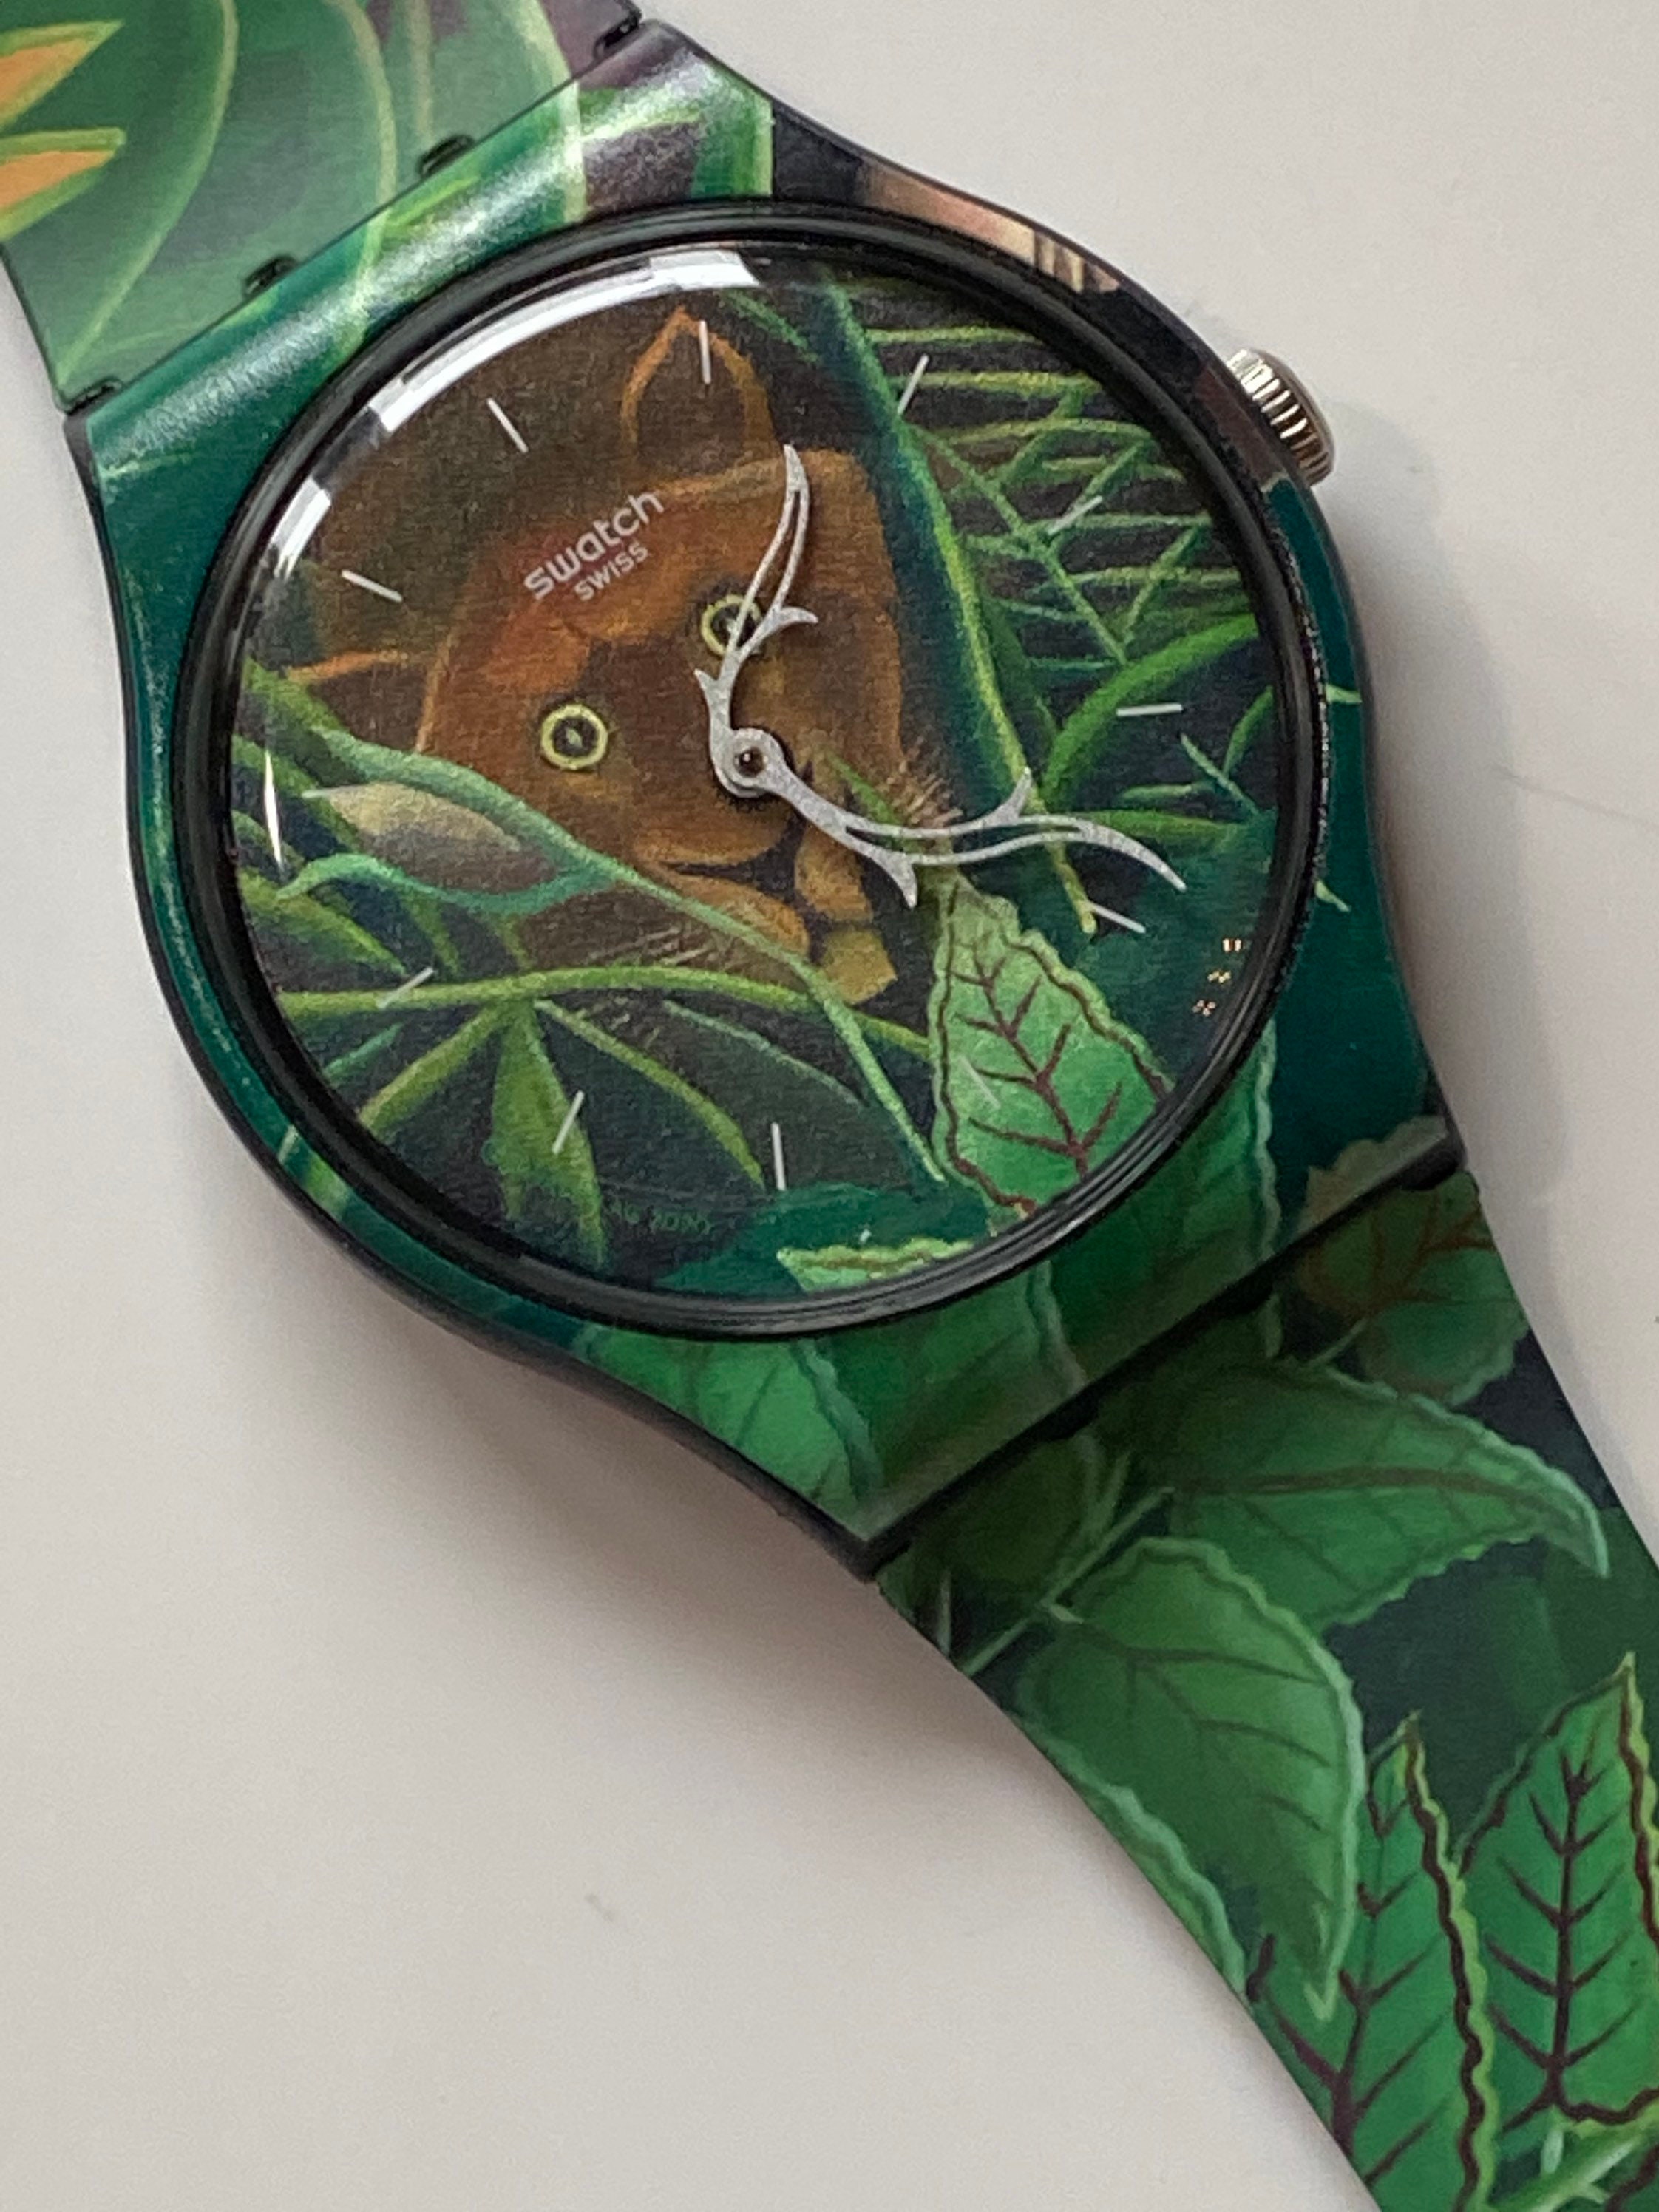 Swatch x MoMA Watches - Rousseau